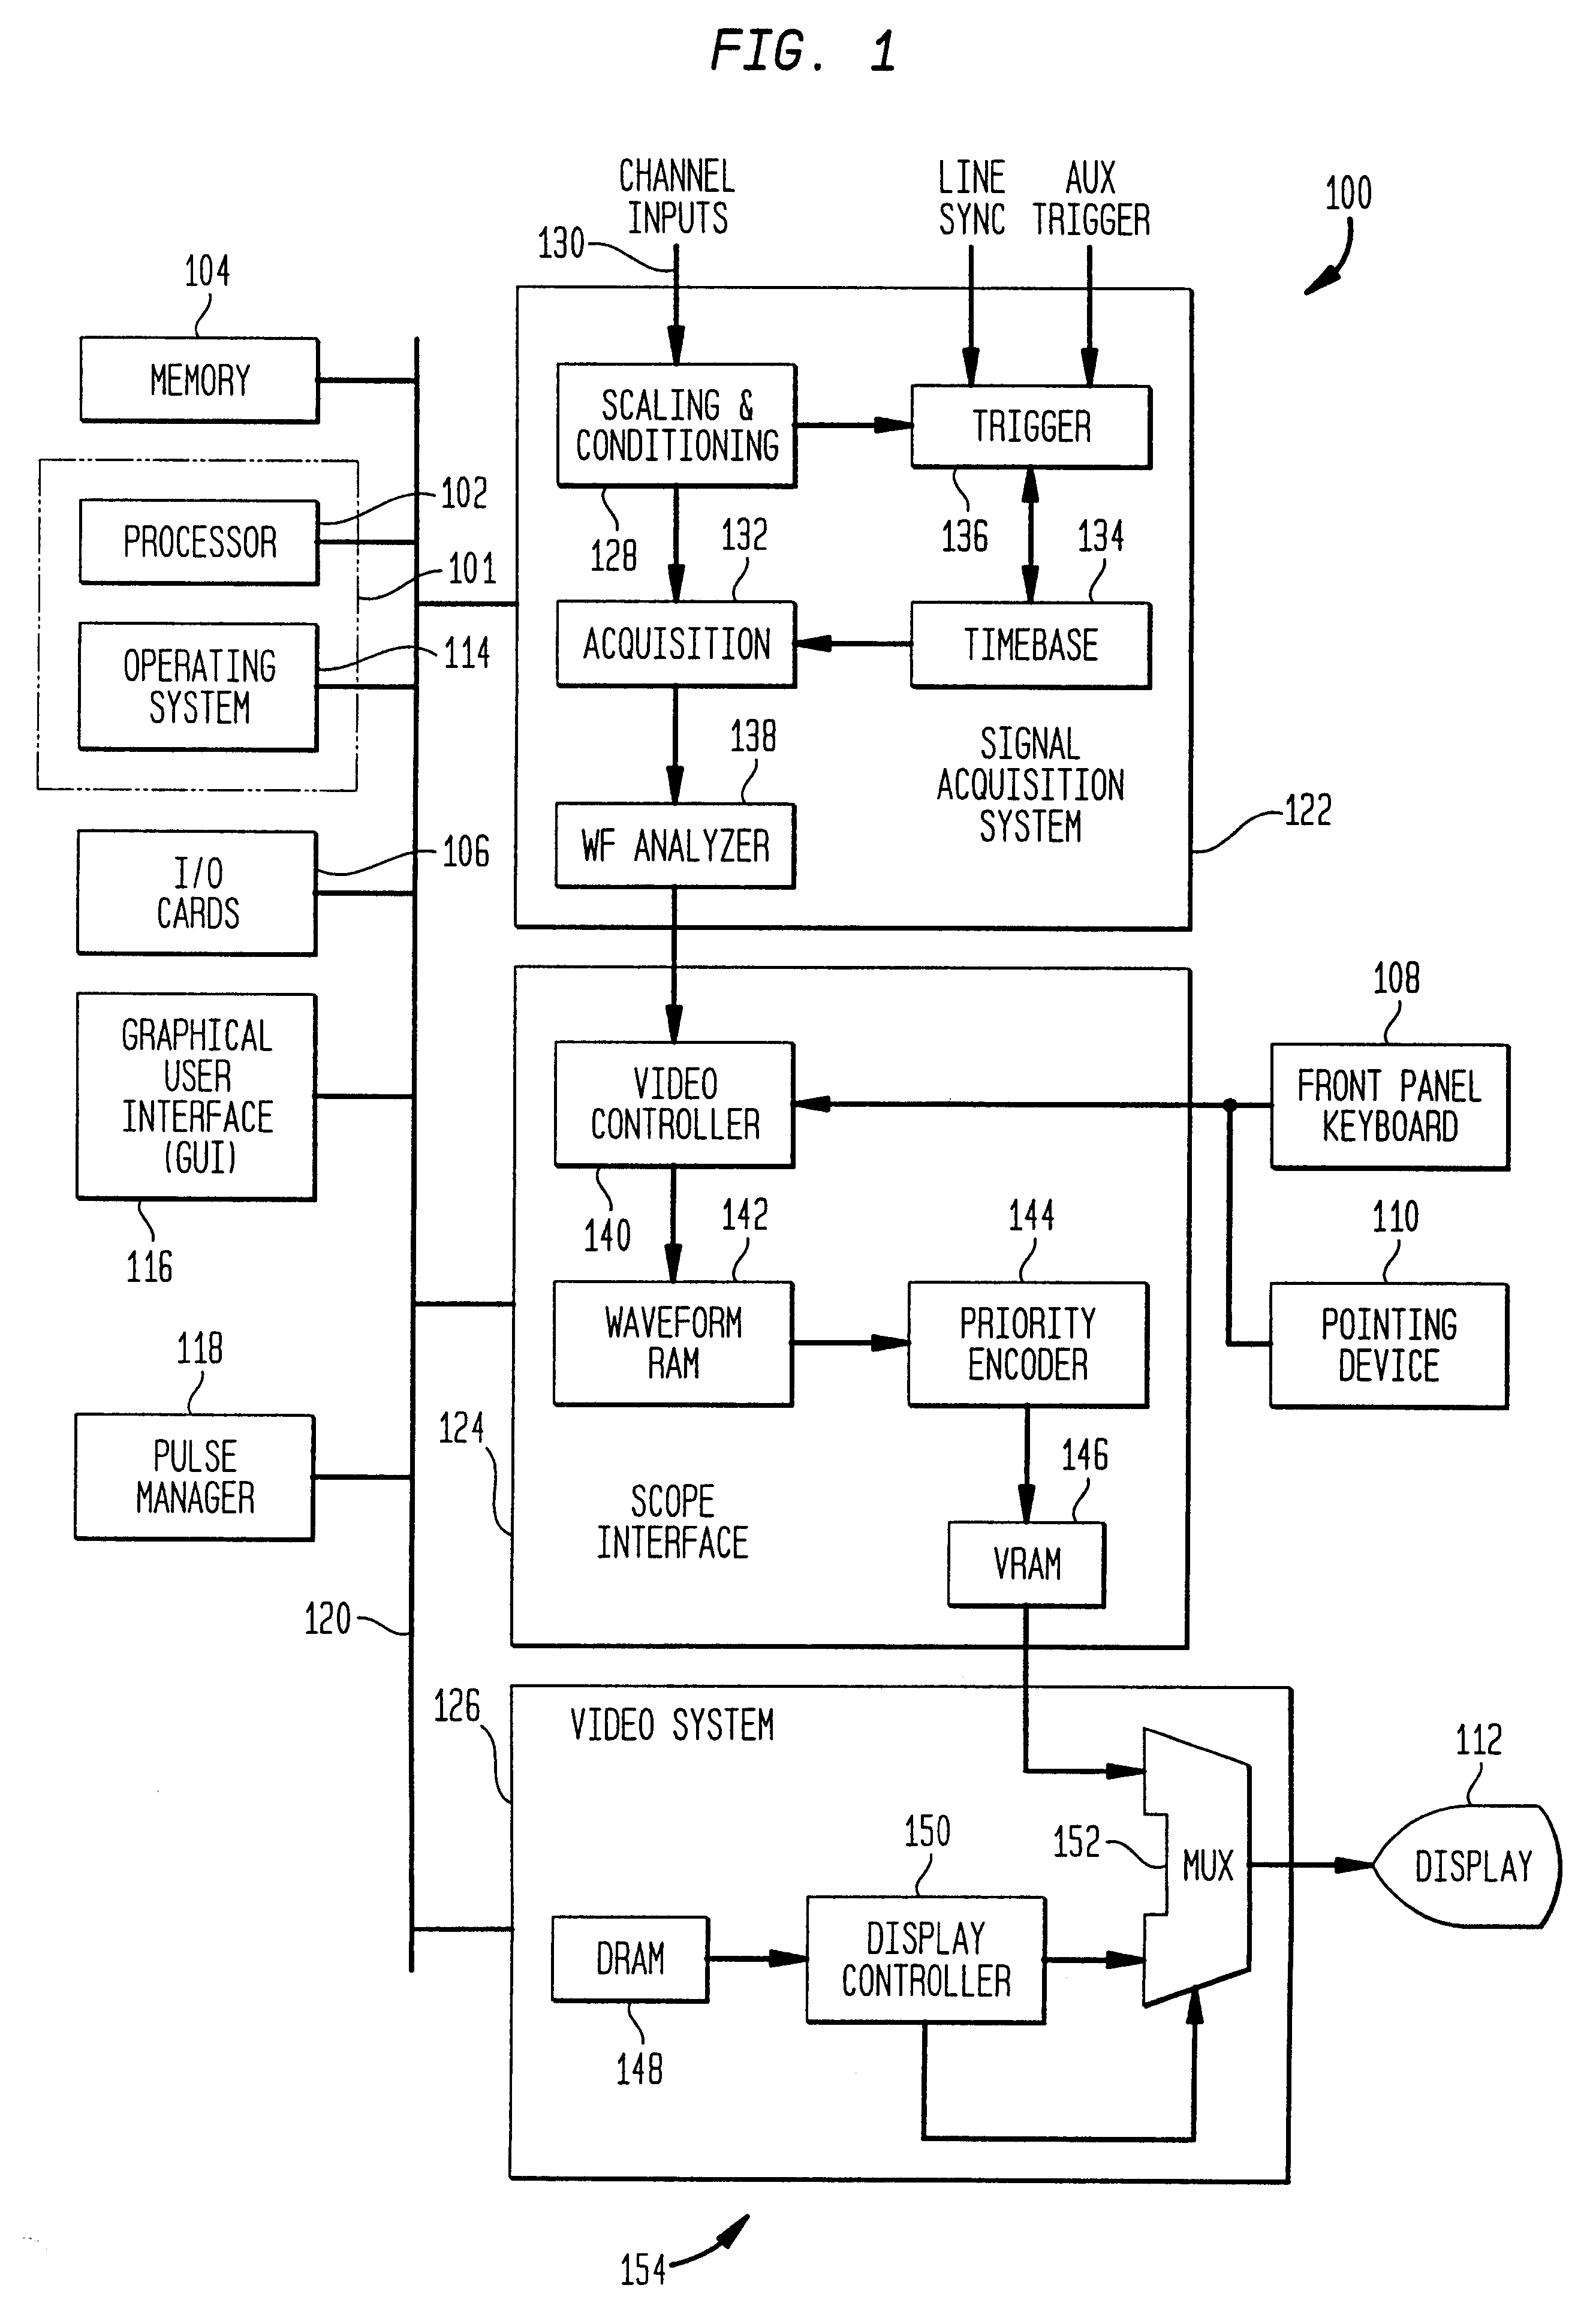 System and method for generating a database of pulse characteristics for each pulse of an acquired signal in a signal measurement system